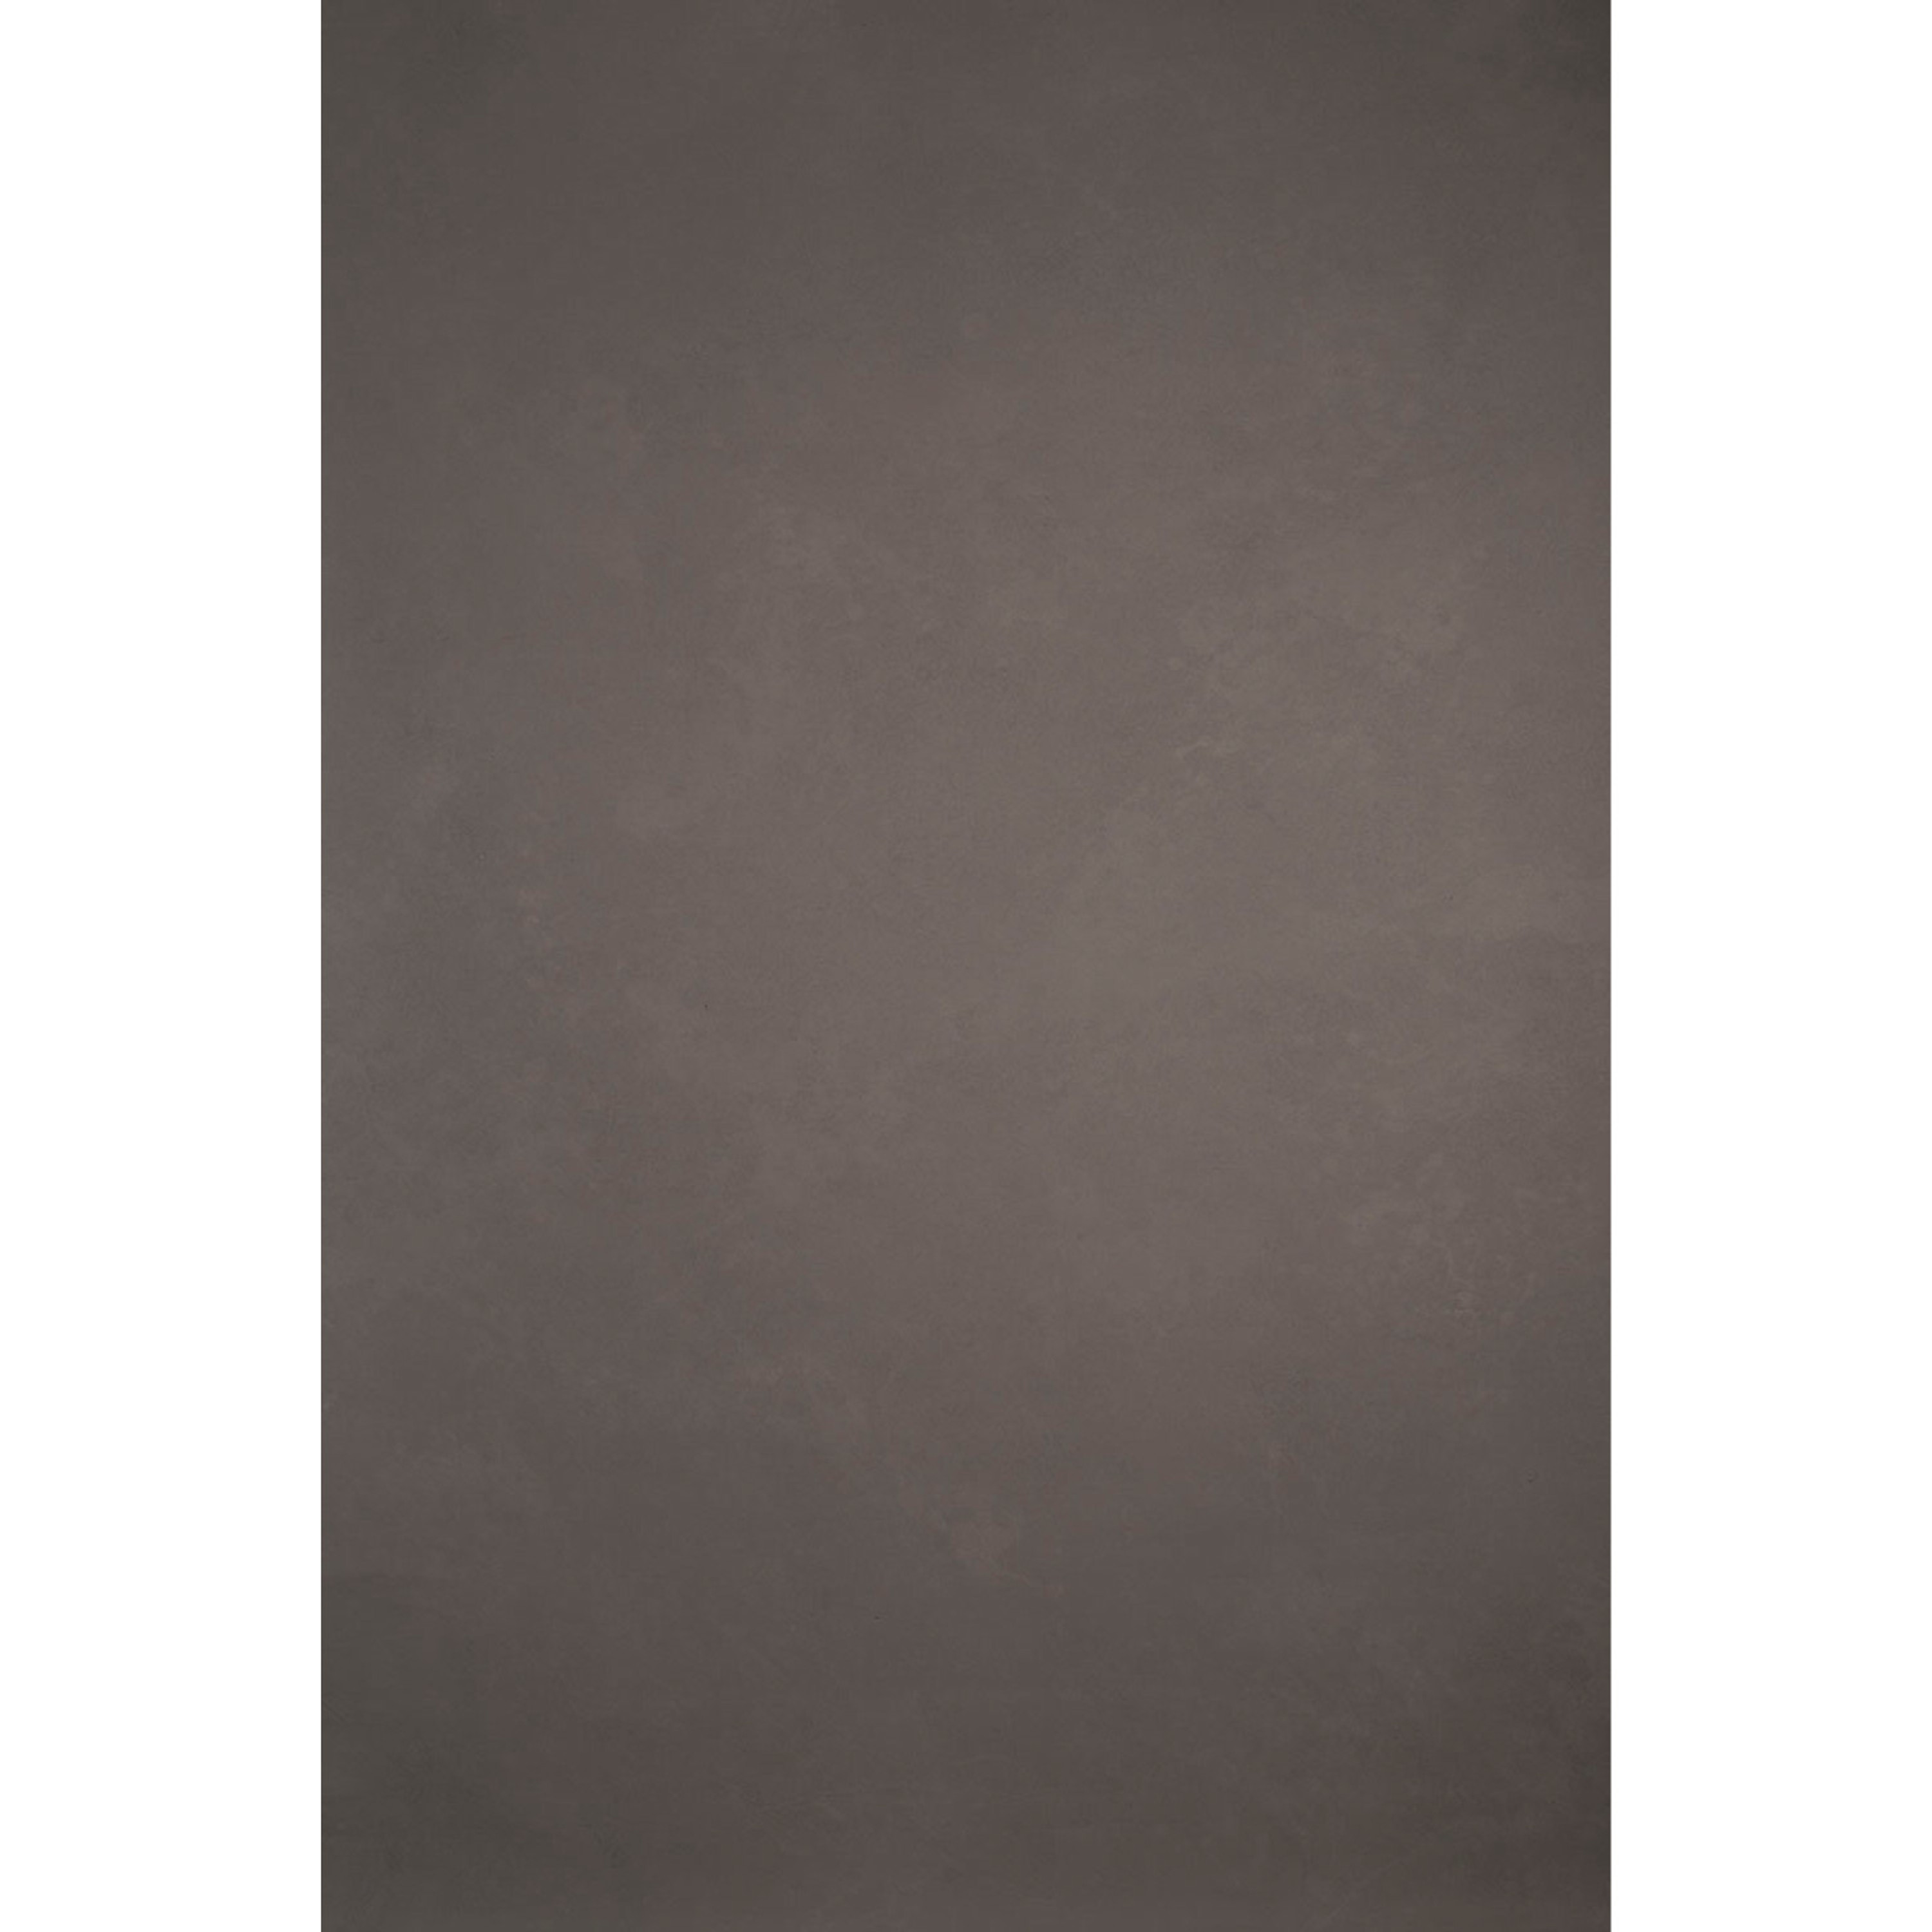 Gravity Backdrops Mid Gray Low Texture M (SN: 9782)